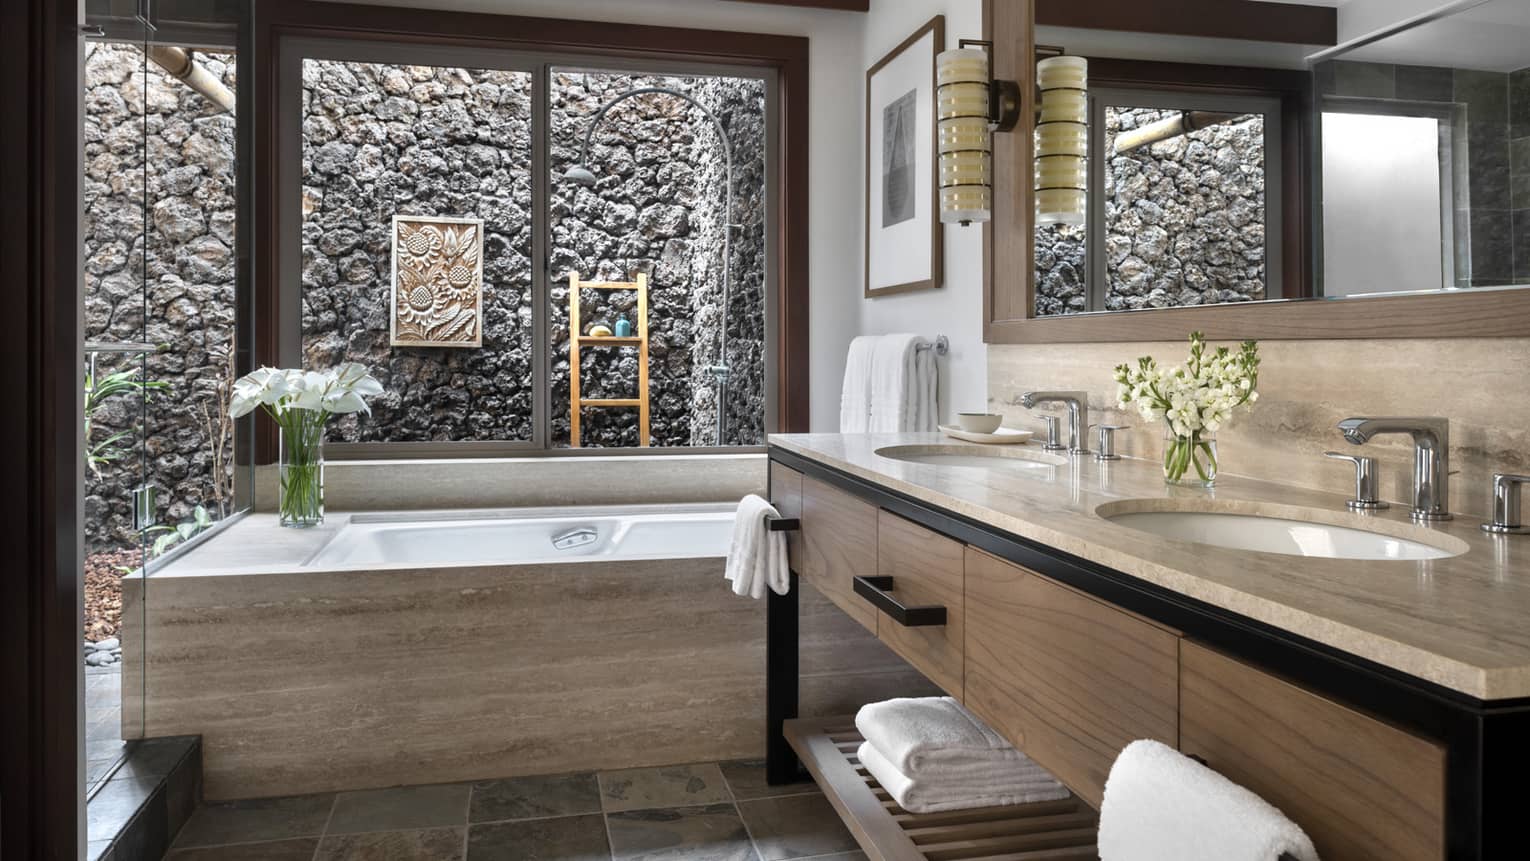 Bathroom with taupe marble vanity and tub, window looks out to outdoor stone shower